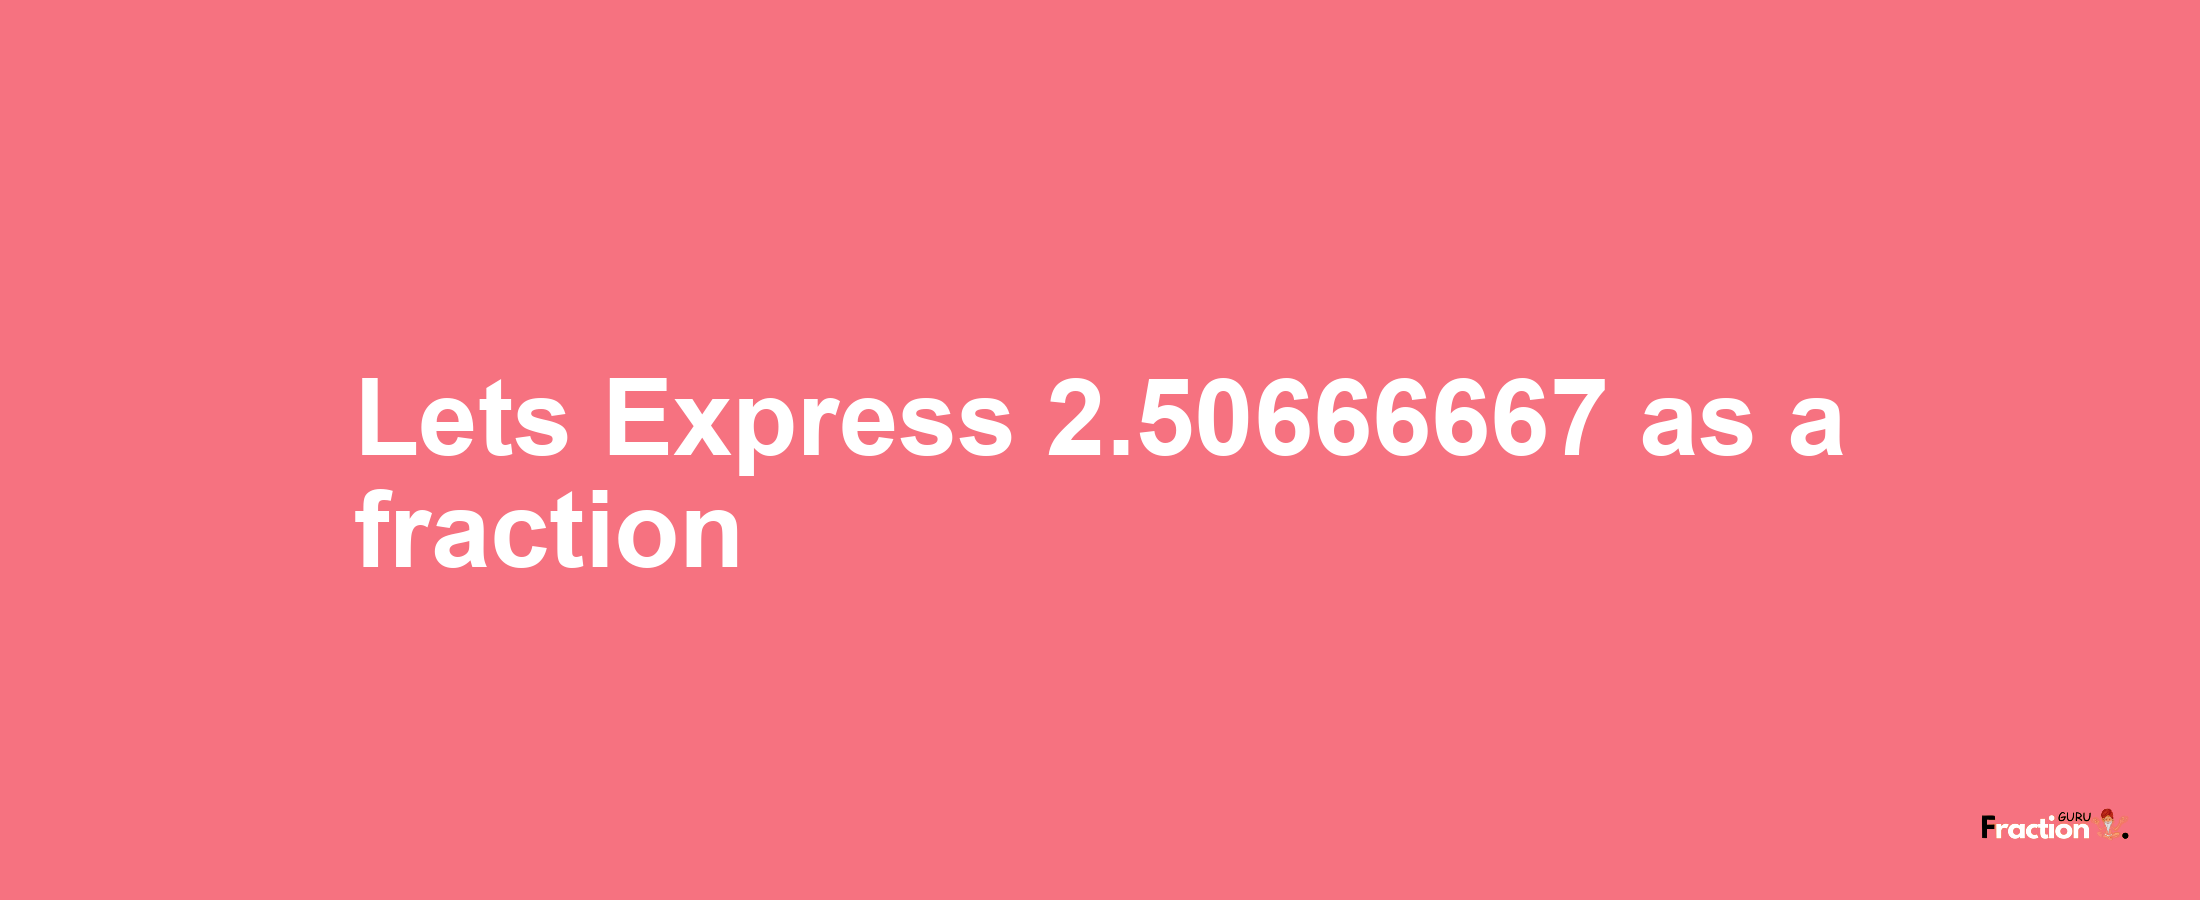 Lets Express 2.50666667 as afraction